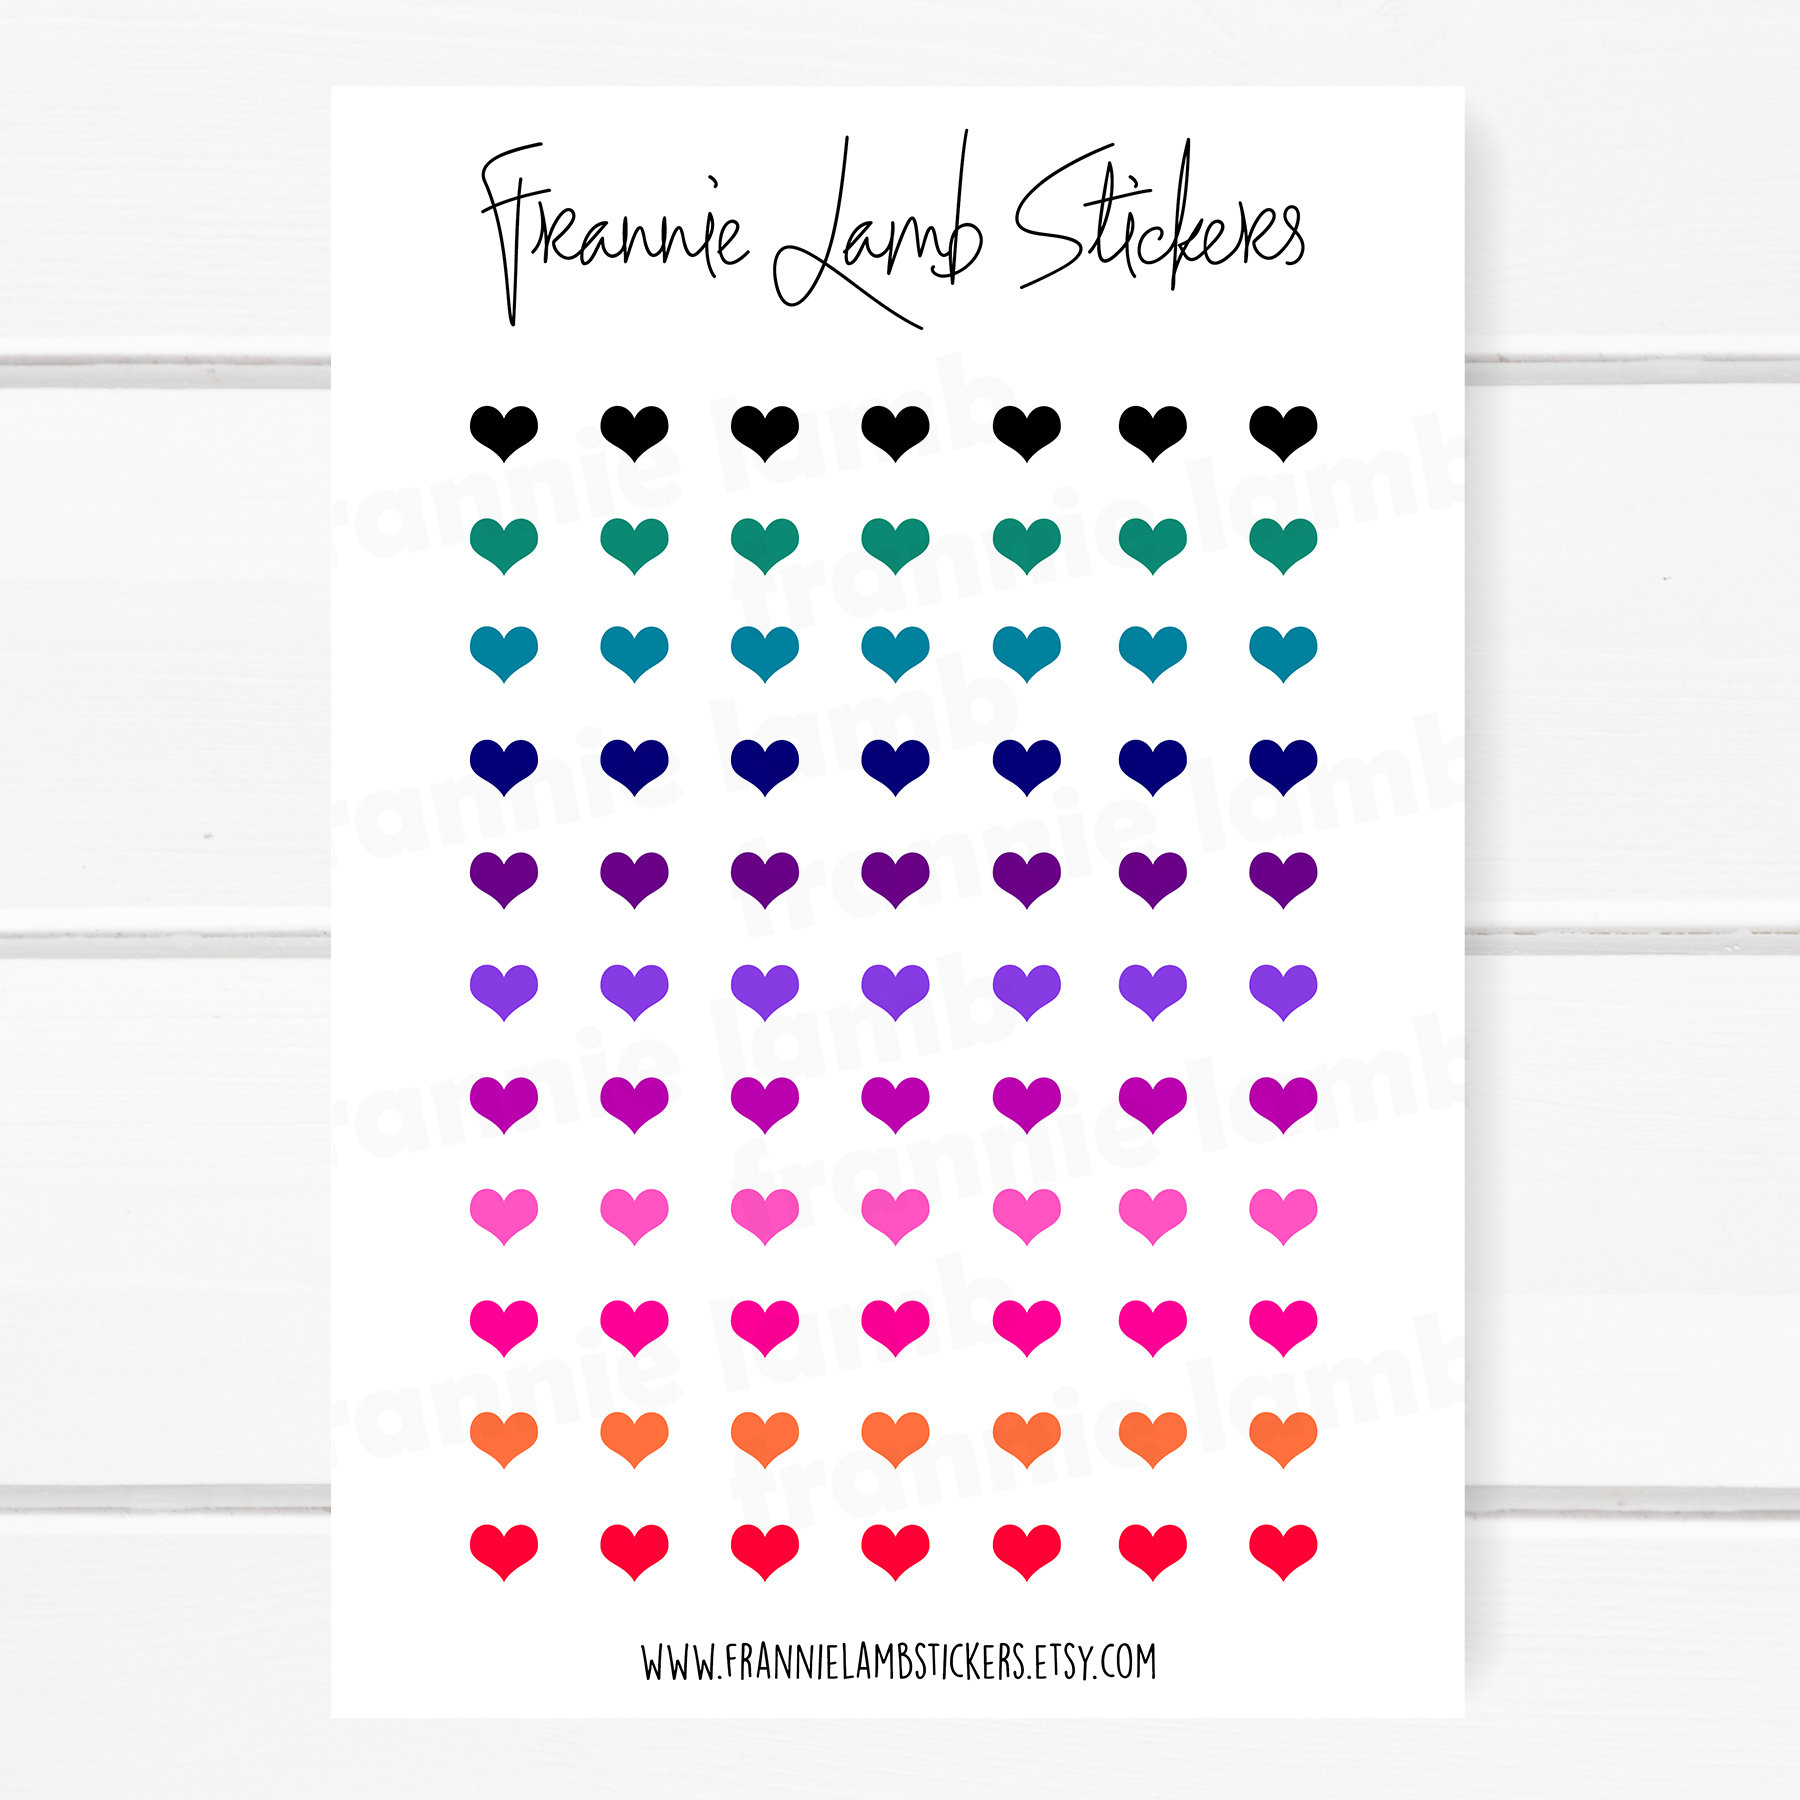 Made with Love Stickers Made with Love Tags INSTANT DOWNLOAD